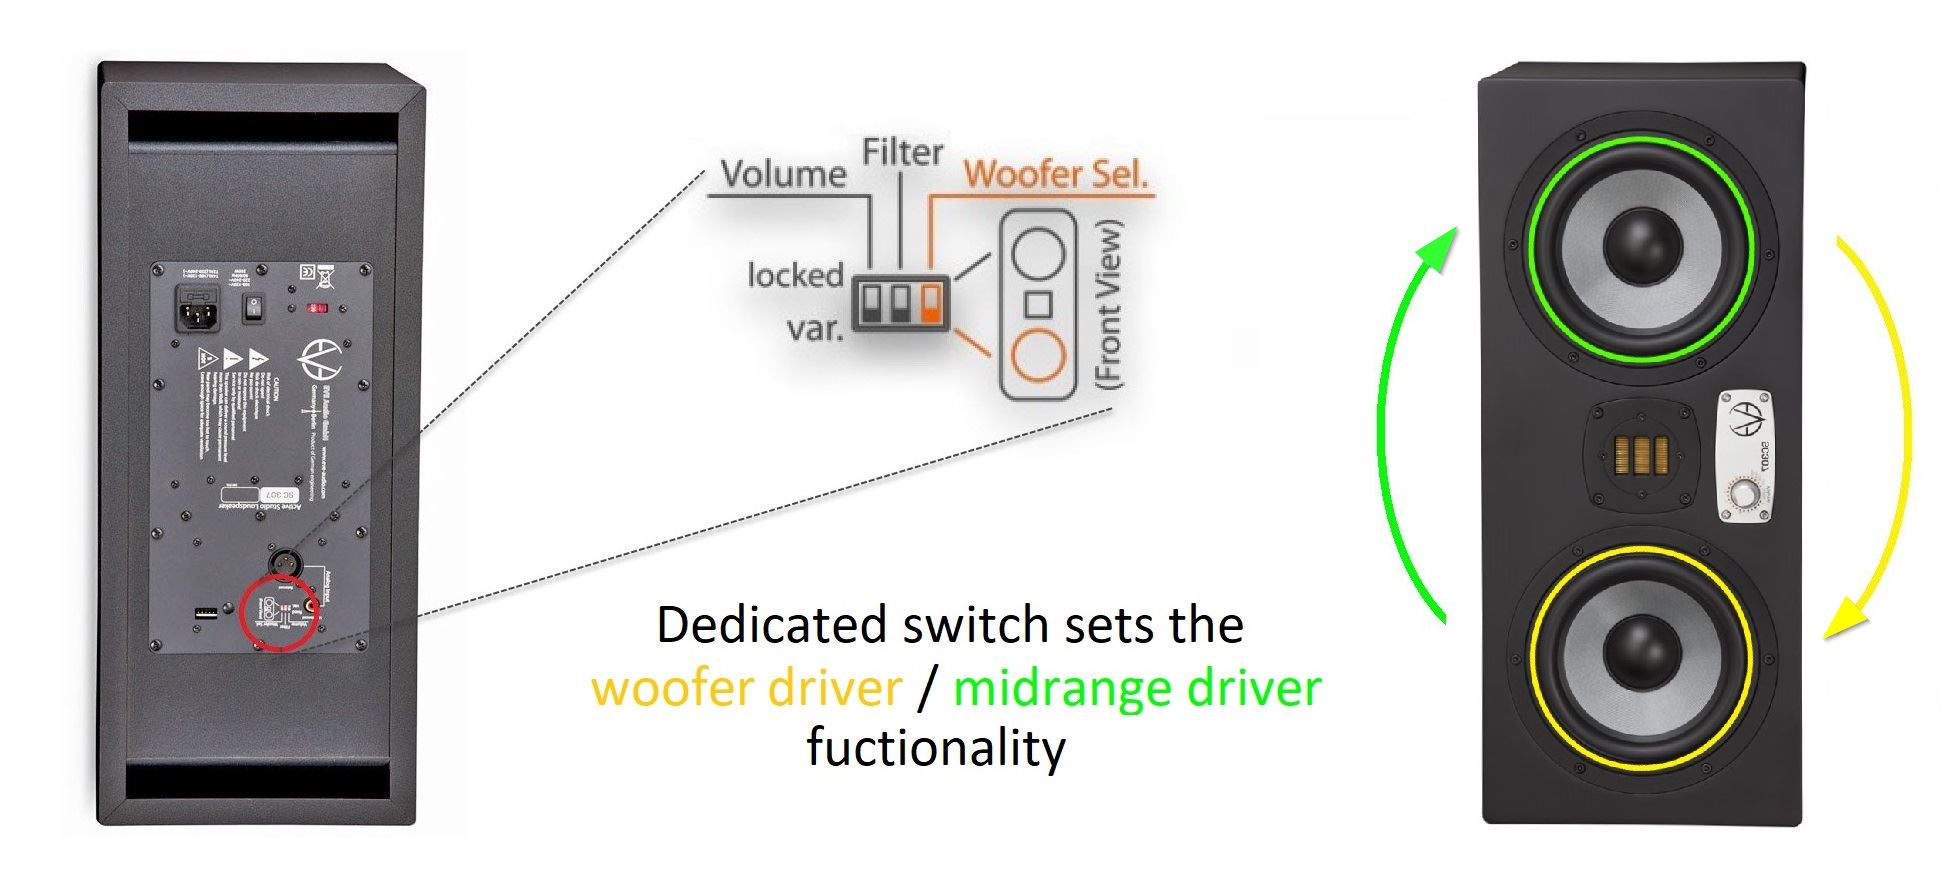 _HDW__Eve_SC307_woofer_select_driver_functionality_switch.jpg